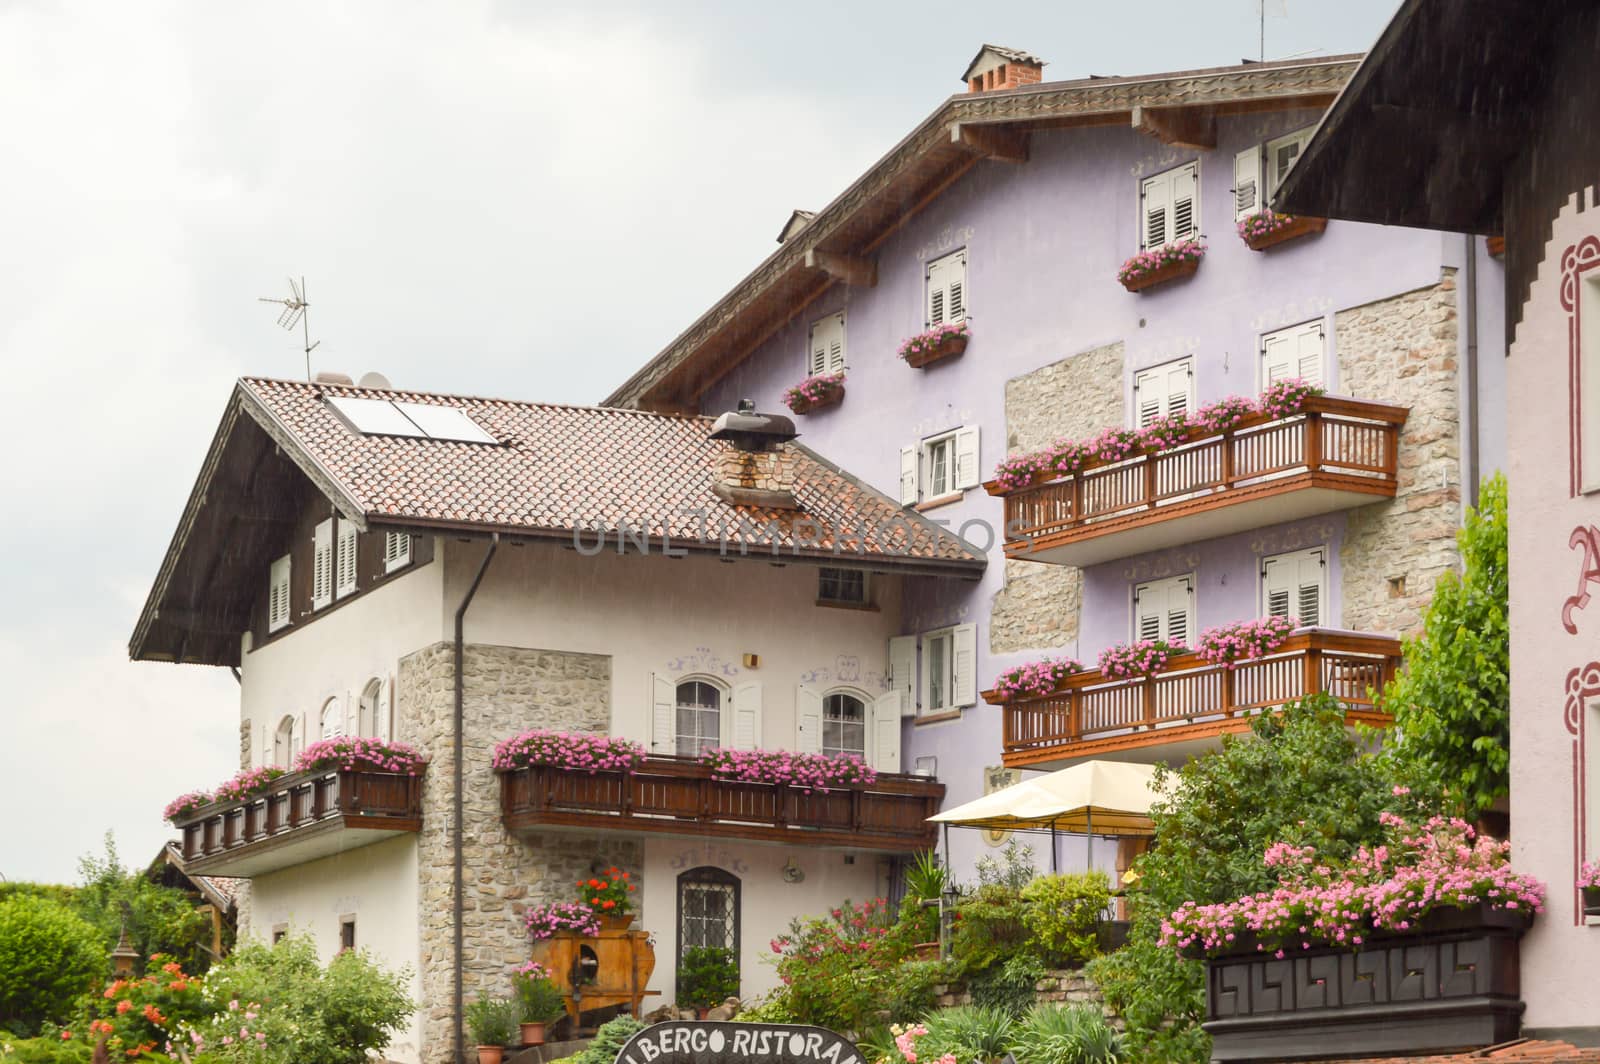 Mauve colored building with several balconies flourished in the dolomites in Italy